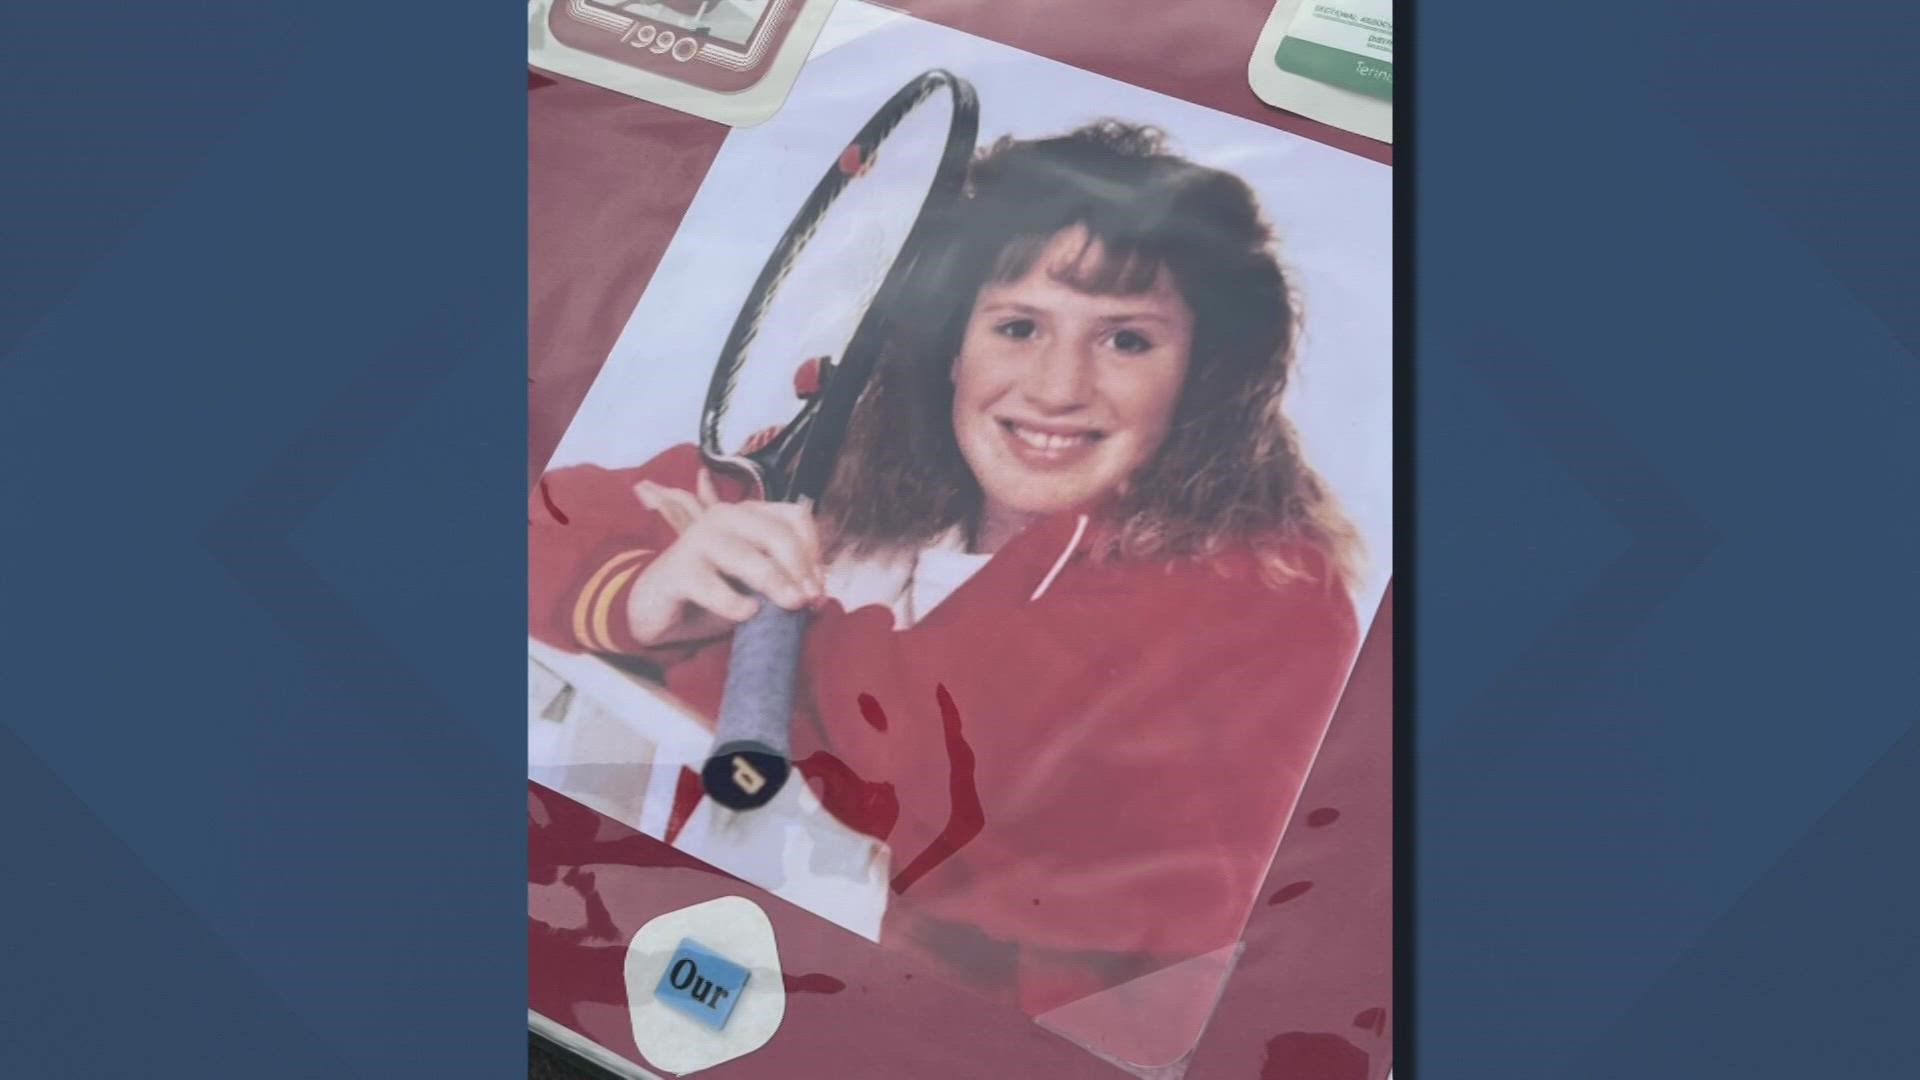 Stacey Colbert went missing in March 1998 and her remains were found six years later in Delaware County.